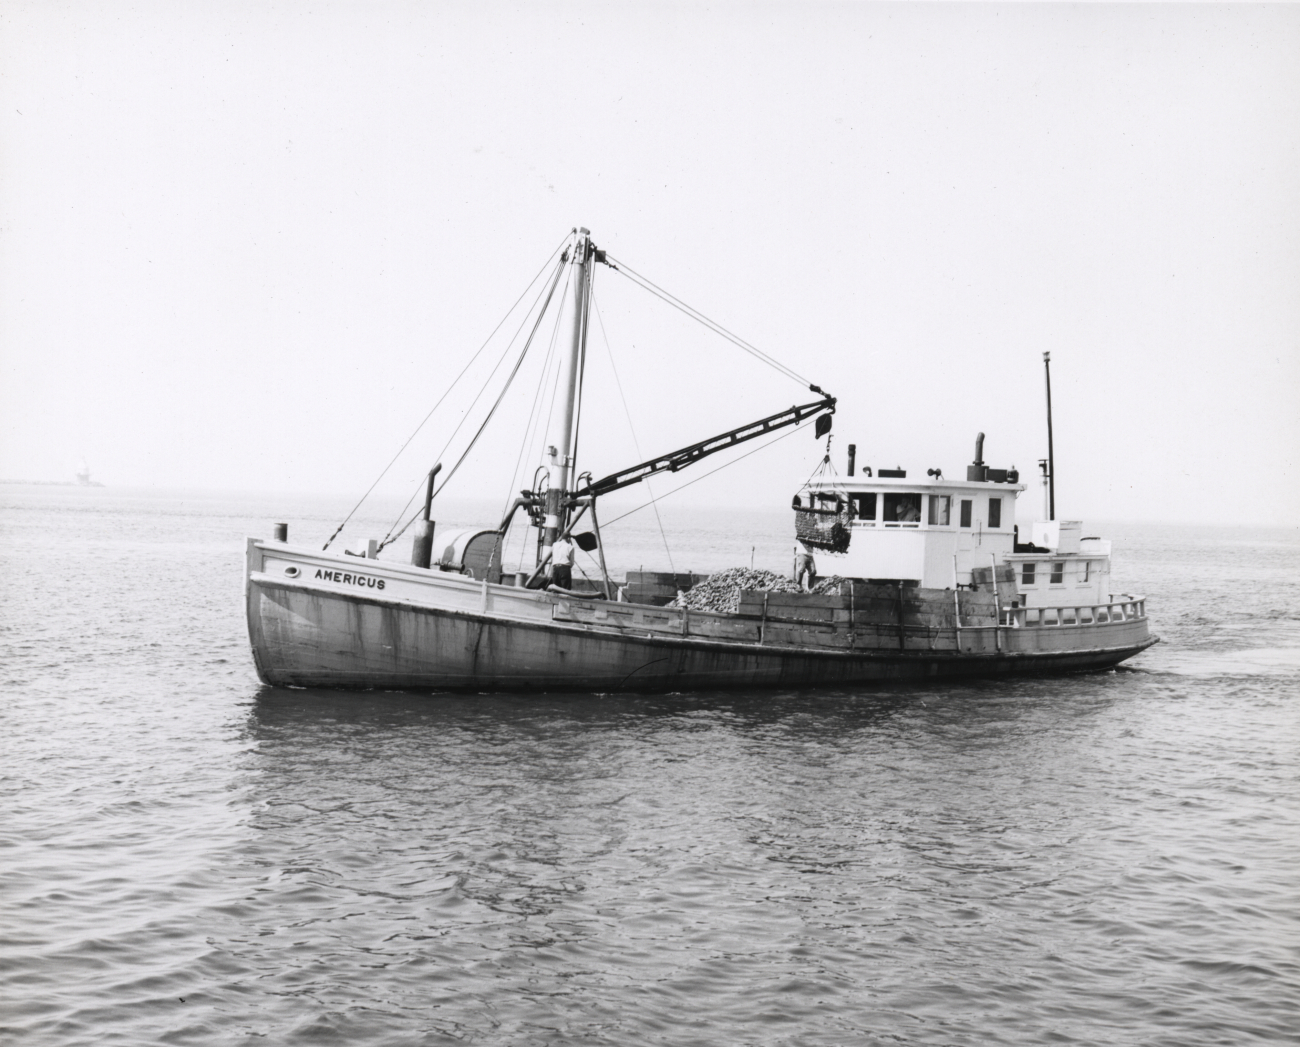 Oyster dredging boat AMERICUS with partial load of oysters and dredge comingaboard